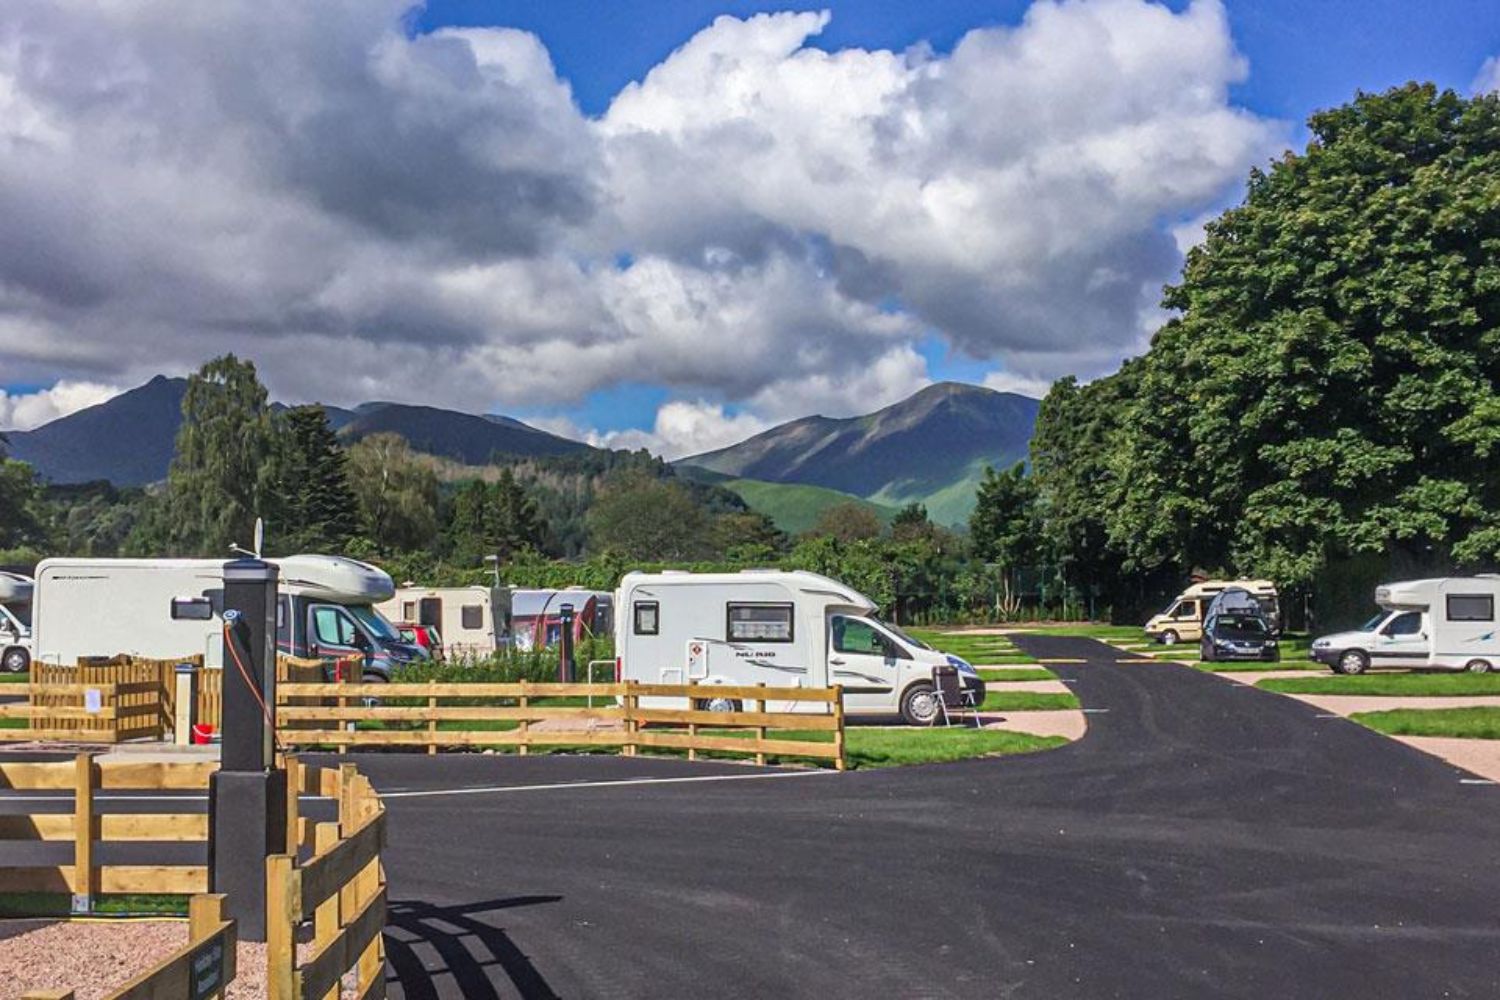 Campers parked up with mountains in background - Keswick Camping & Caravanning Club Site, Lake District 